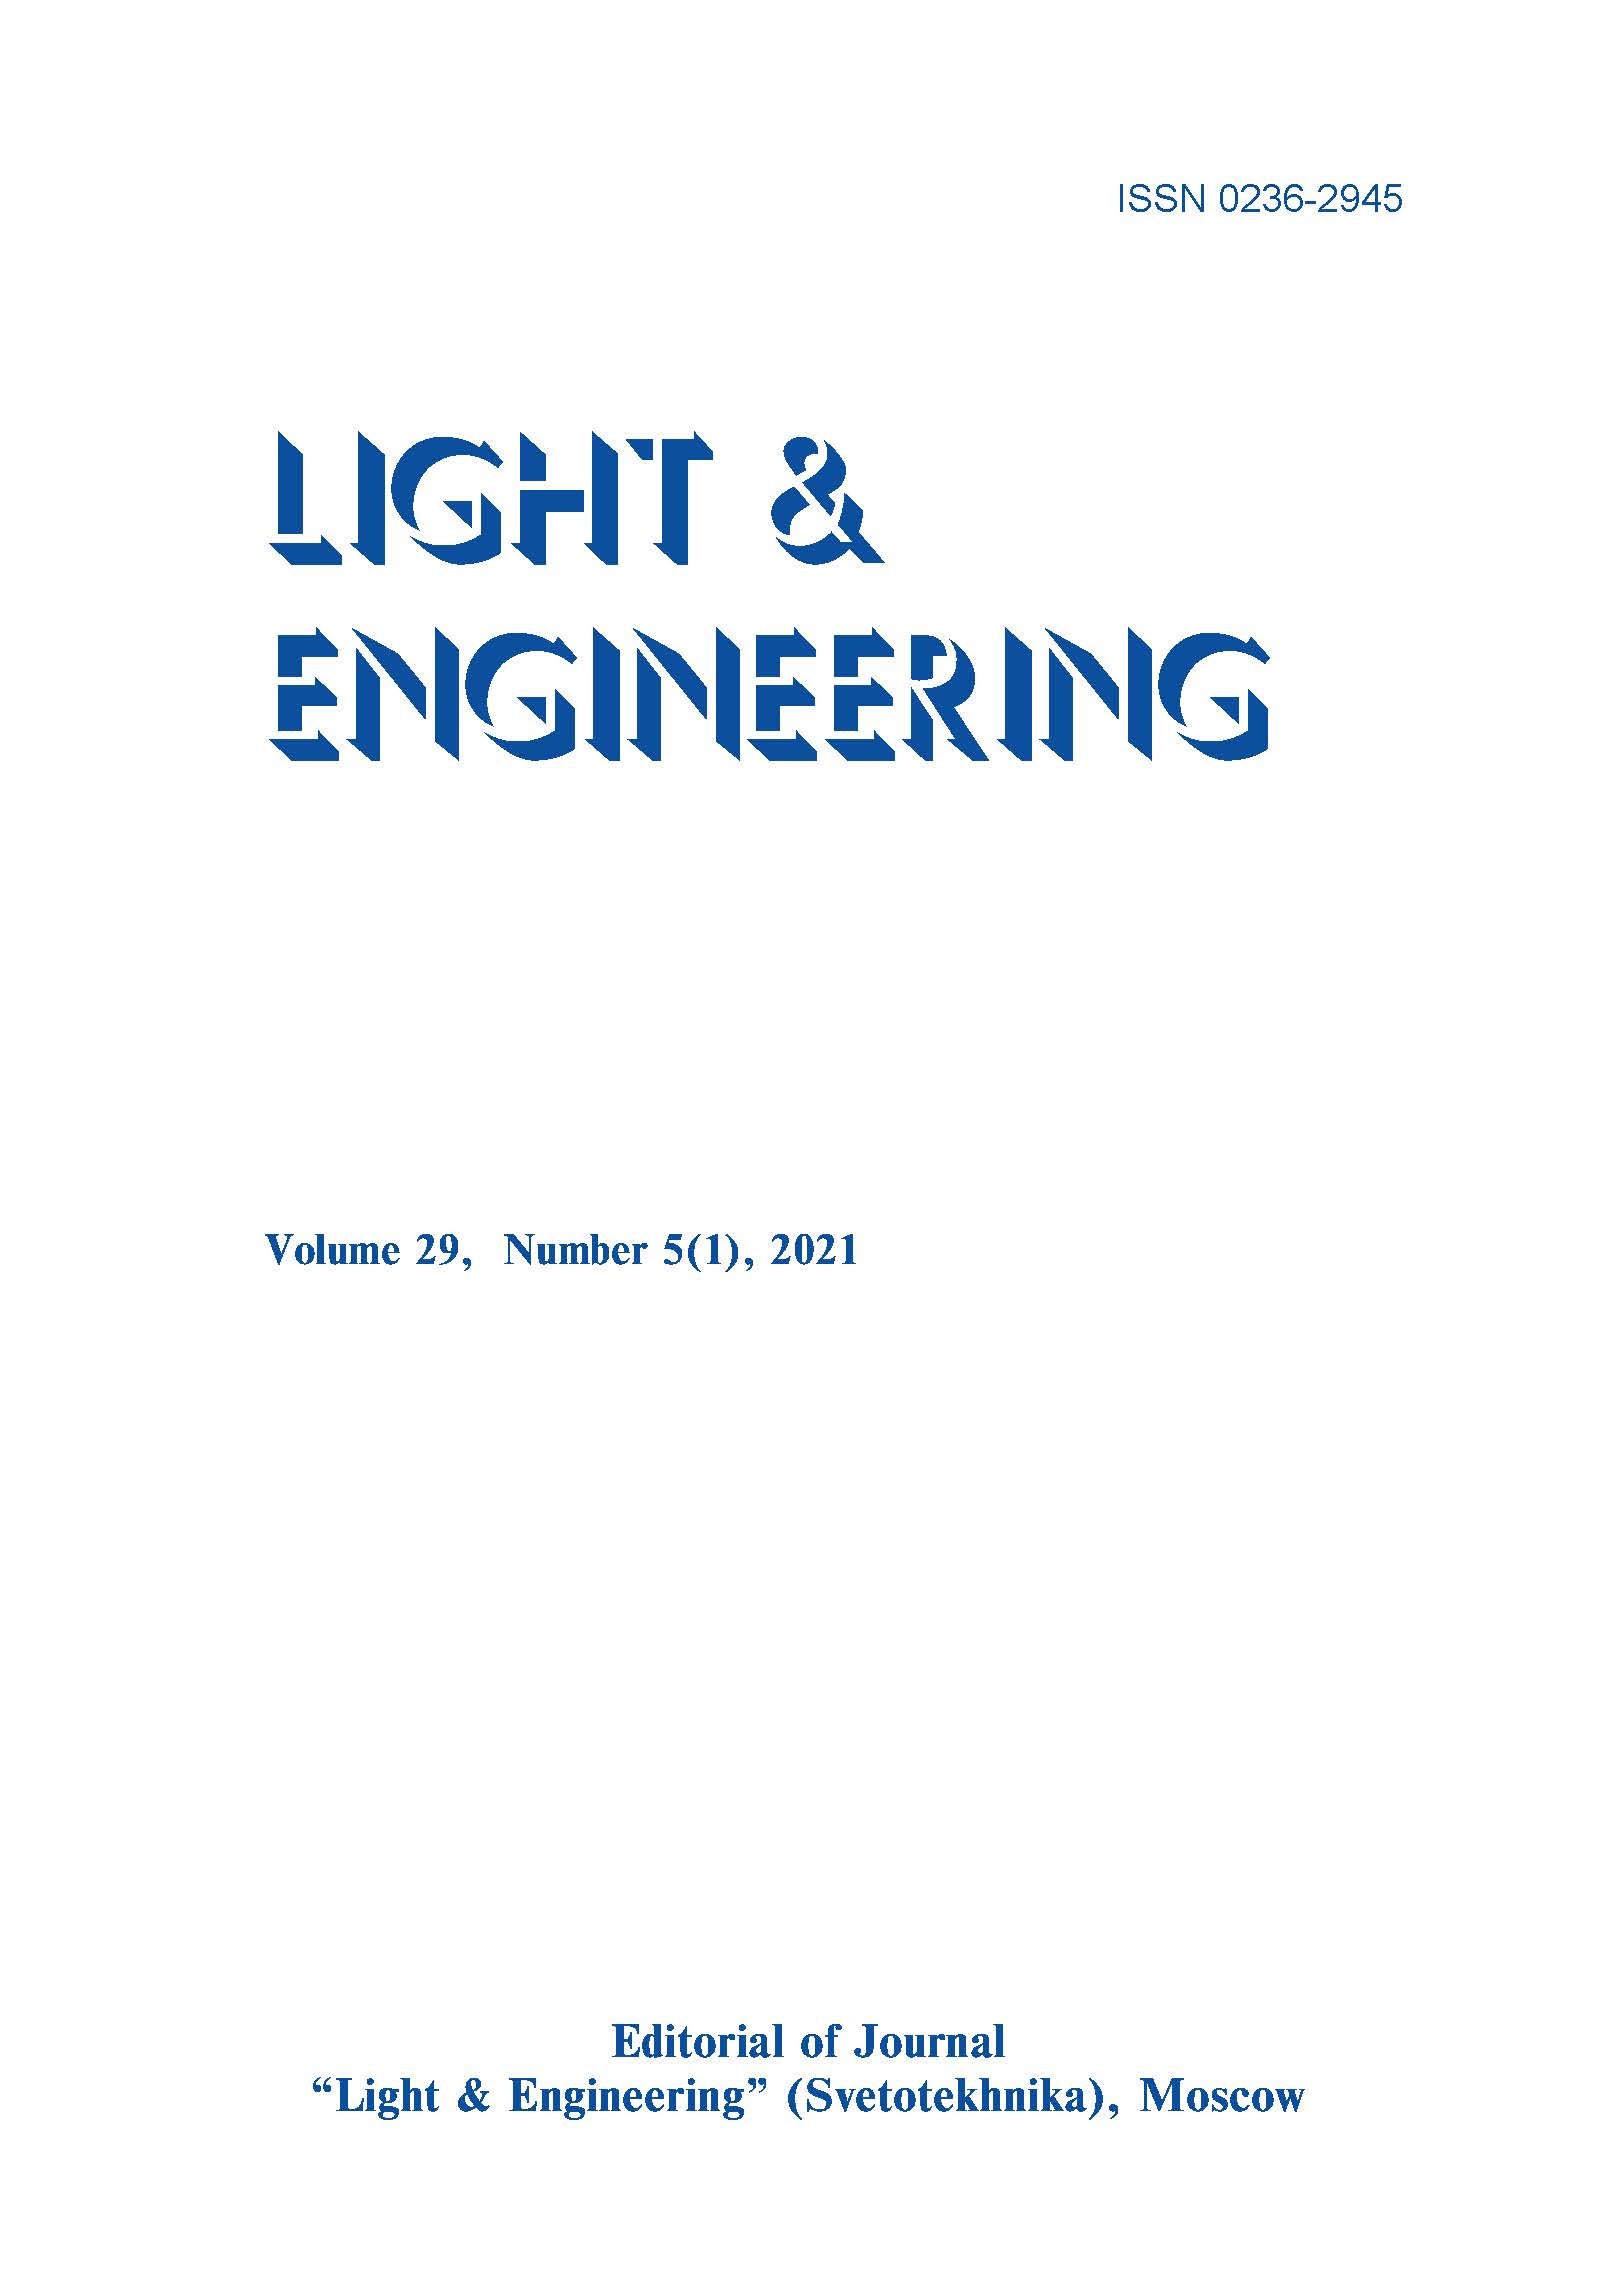 The Usage of Solar Power in the Heating Treatment of Concrete L&E, Vol. 29, No. 5 (1), 2021